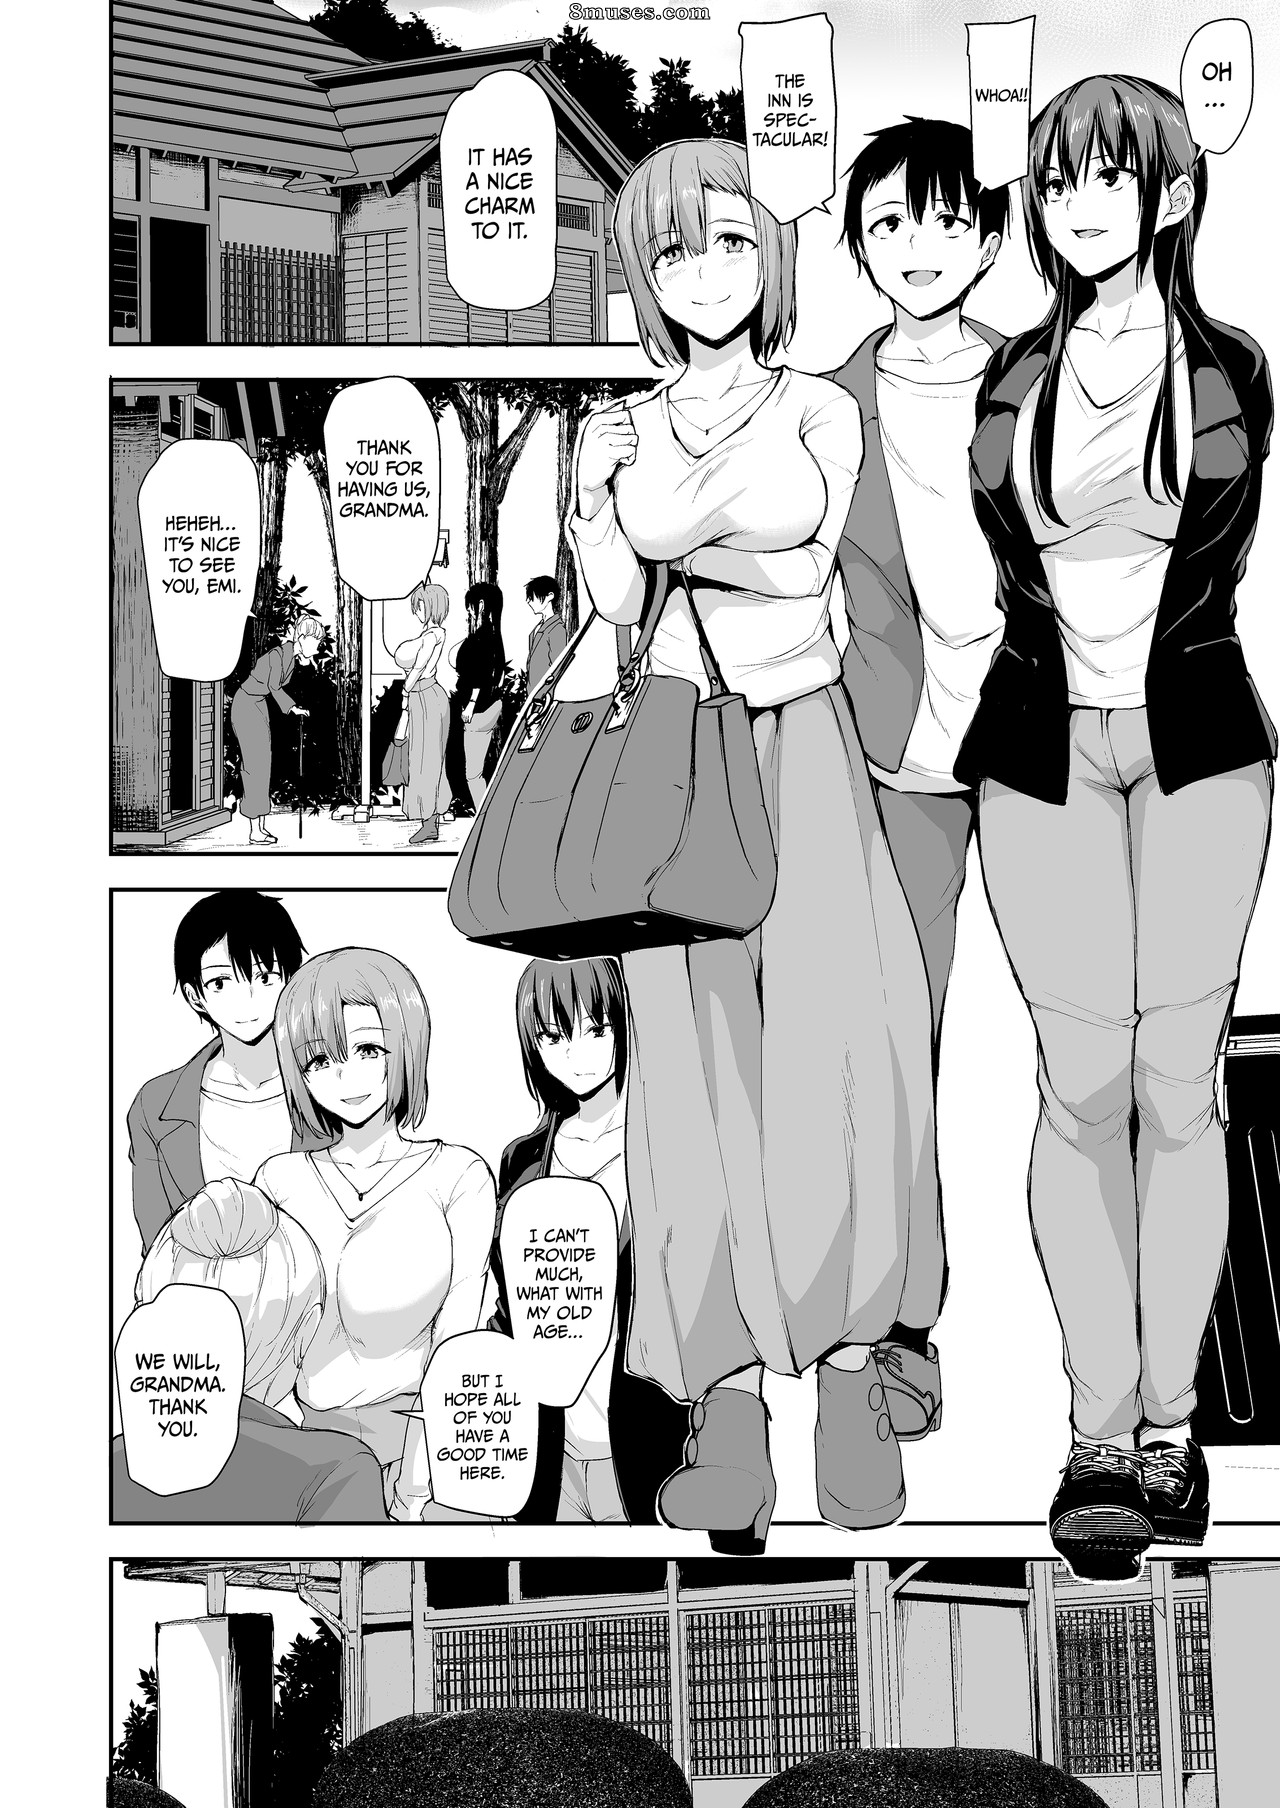 Page 5 Fakku-Comics/SHIMA-PAN-Tachibana-Omina/I-Cant-Get-it-Up-Without-Two-Pairs-of-Big-Breasts-So- My-Wife-Brought-Her-Friend-2 8muses